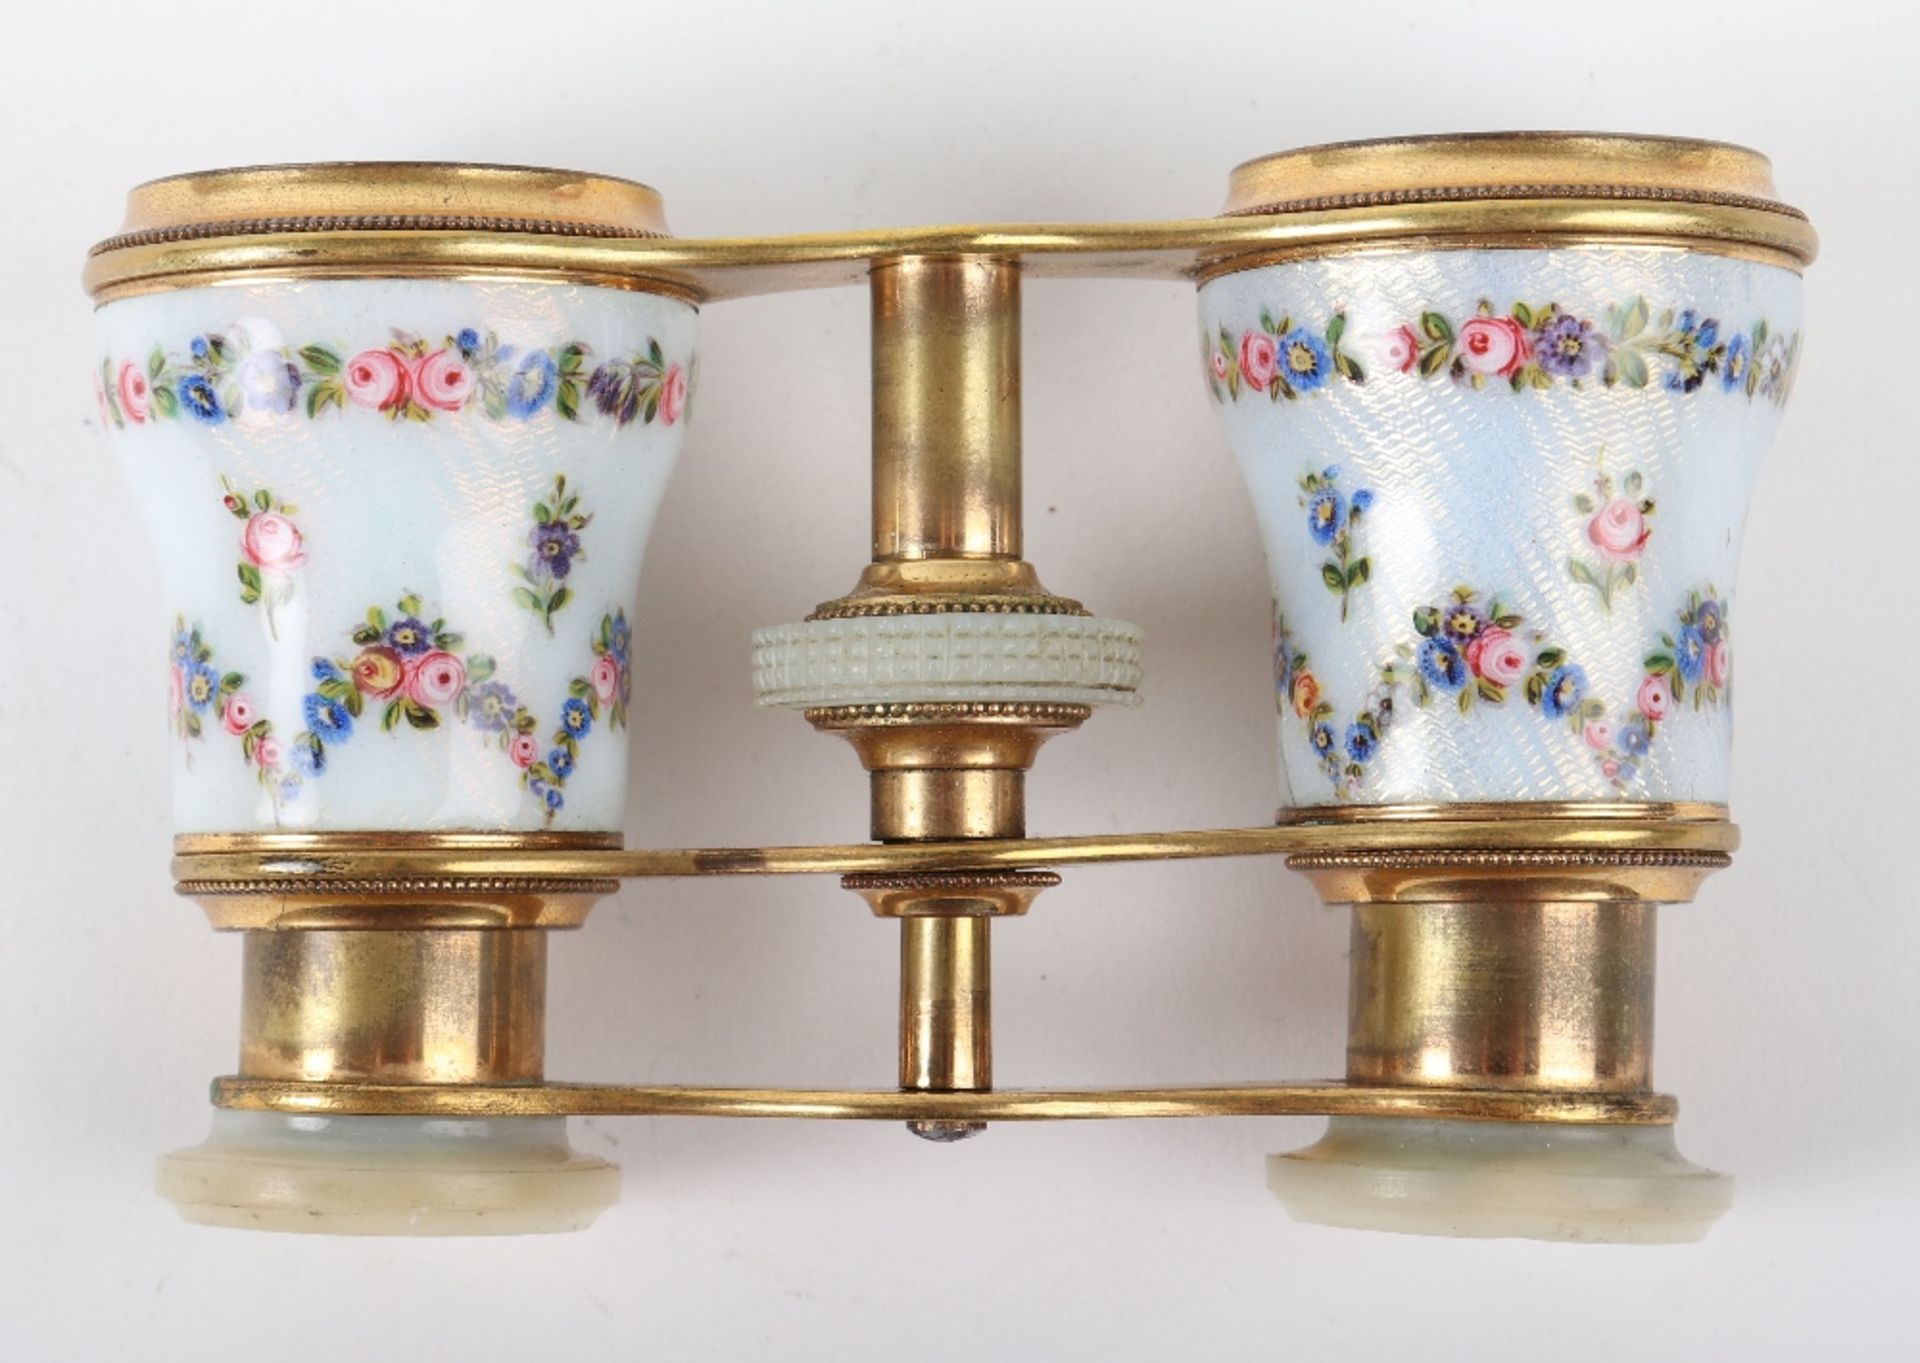 A pair of mother of pearl and guilloche enamel opera glasses